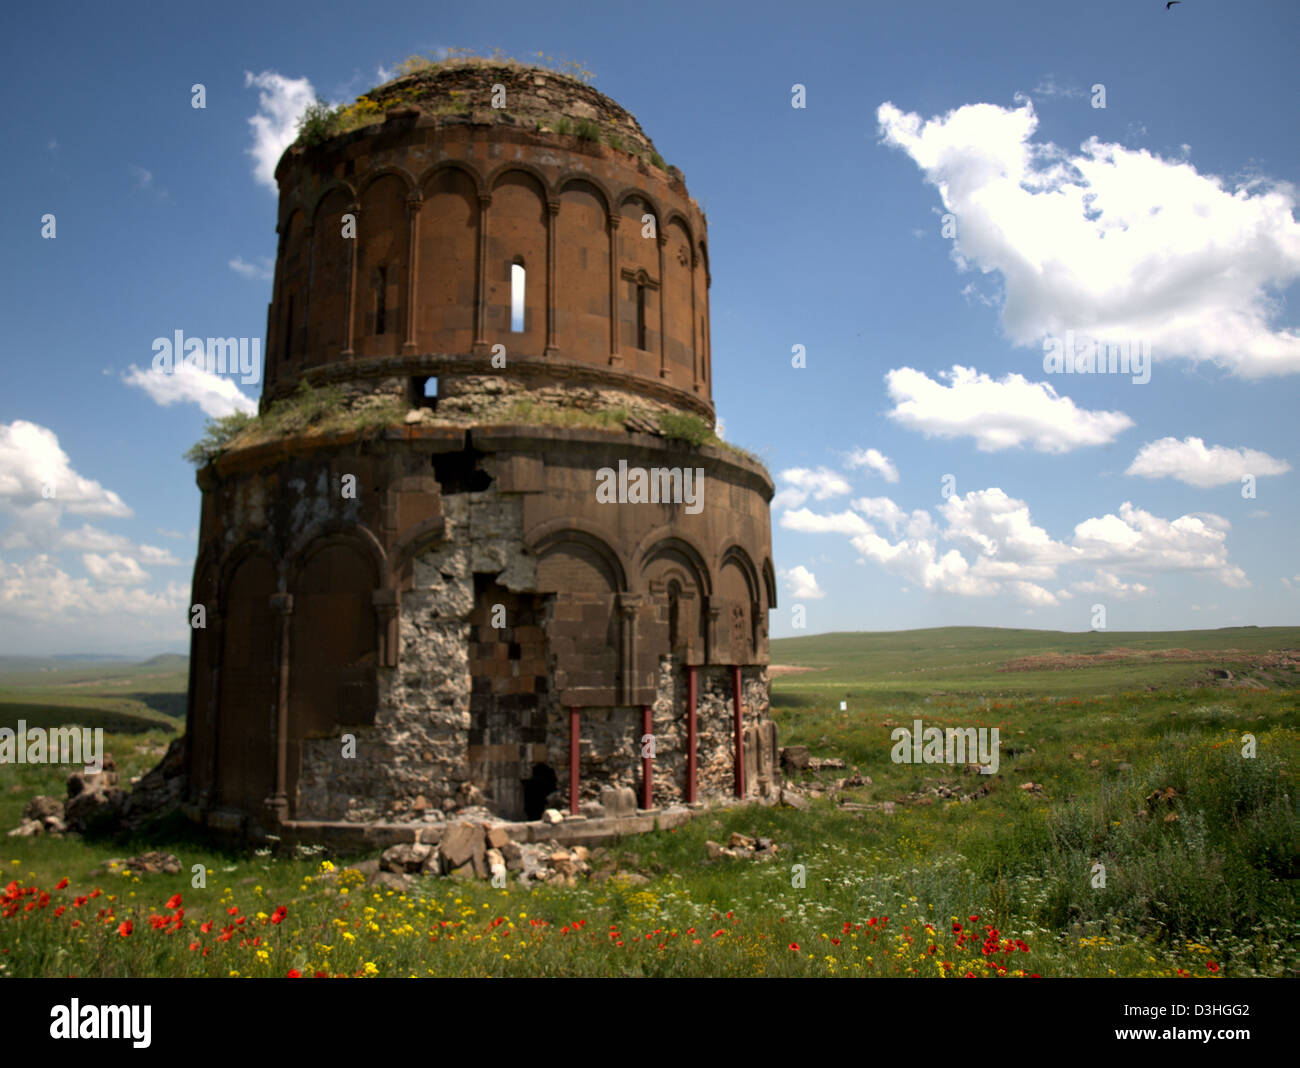 The Church of the Redeemer (Surb Prkich), at the ruins of the ancient Armenia city of Ani, near Kars, Eastern Turkey. Stock Photo